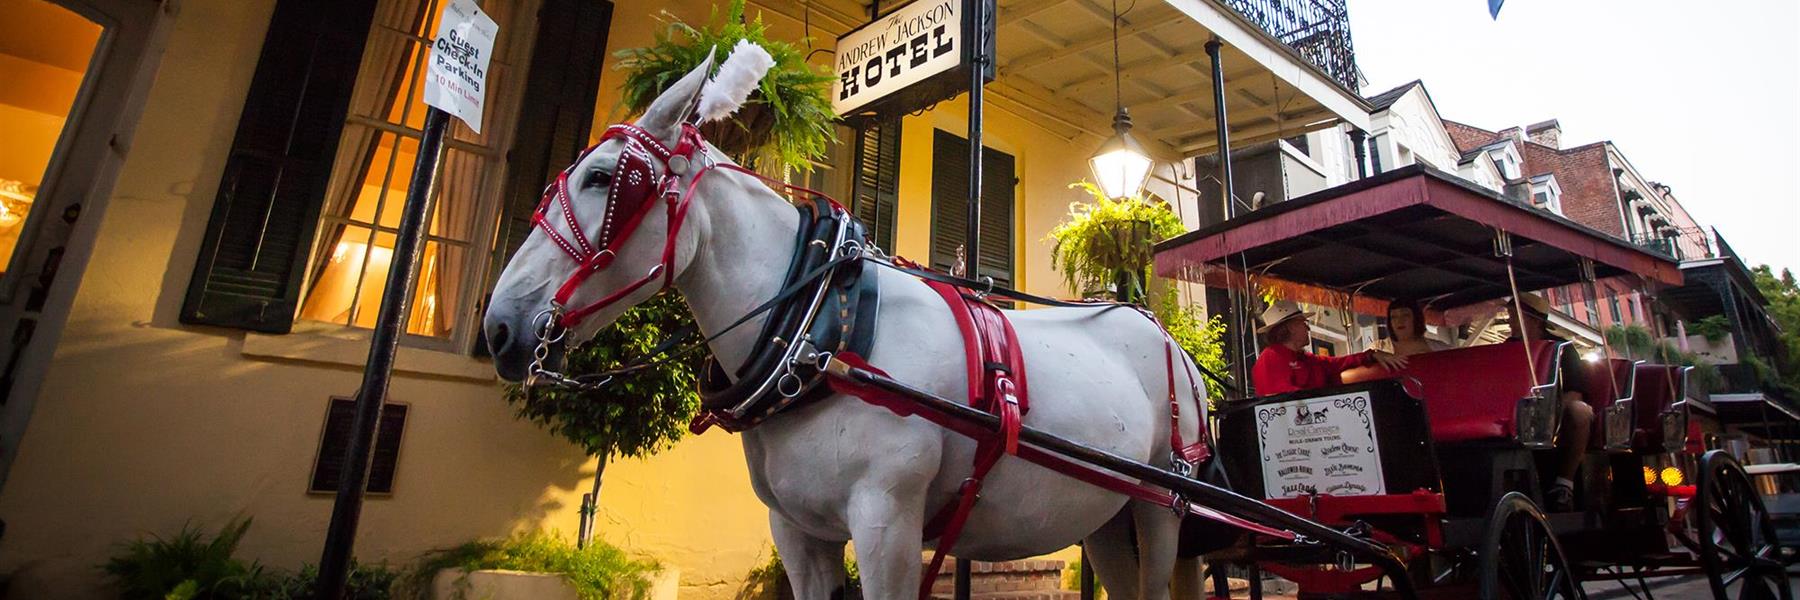 French Quarter Carriage Tours in New Orleans, Louisiana